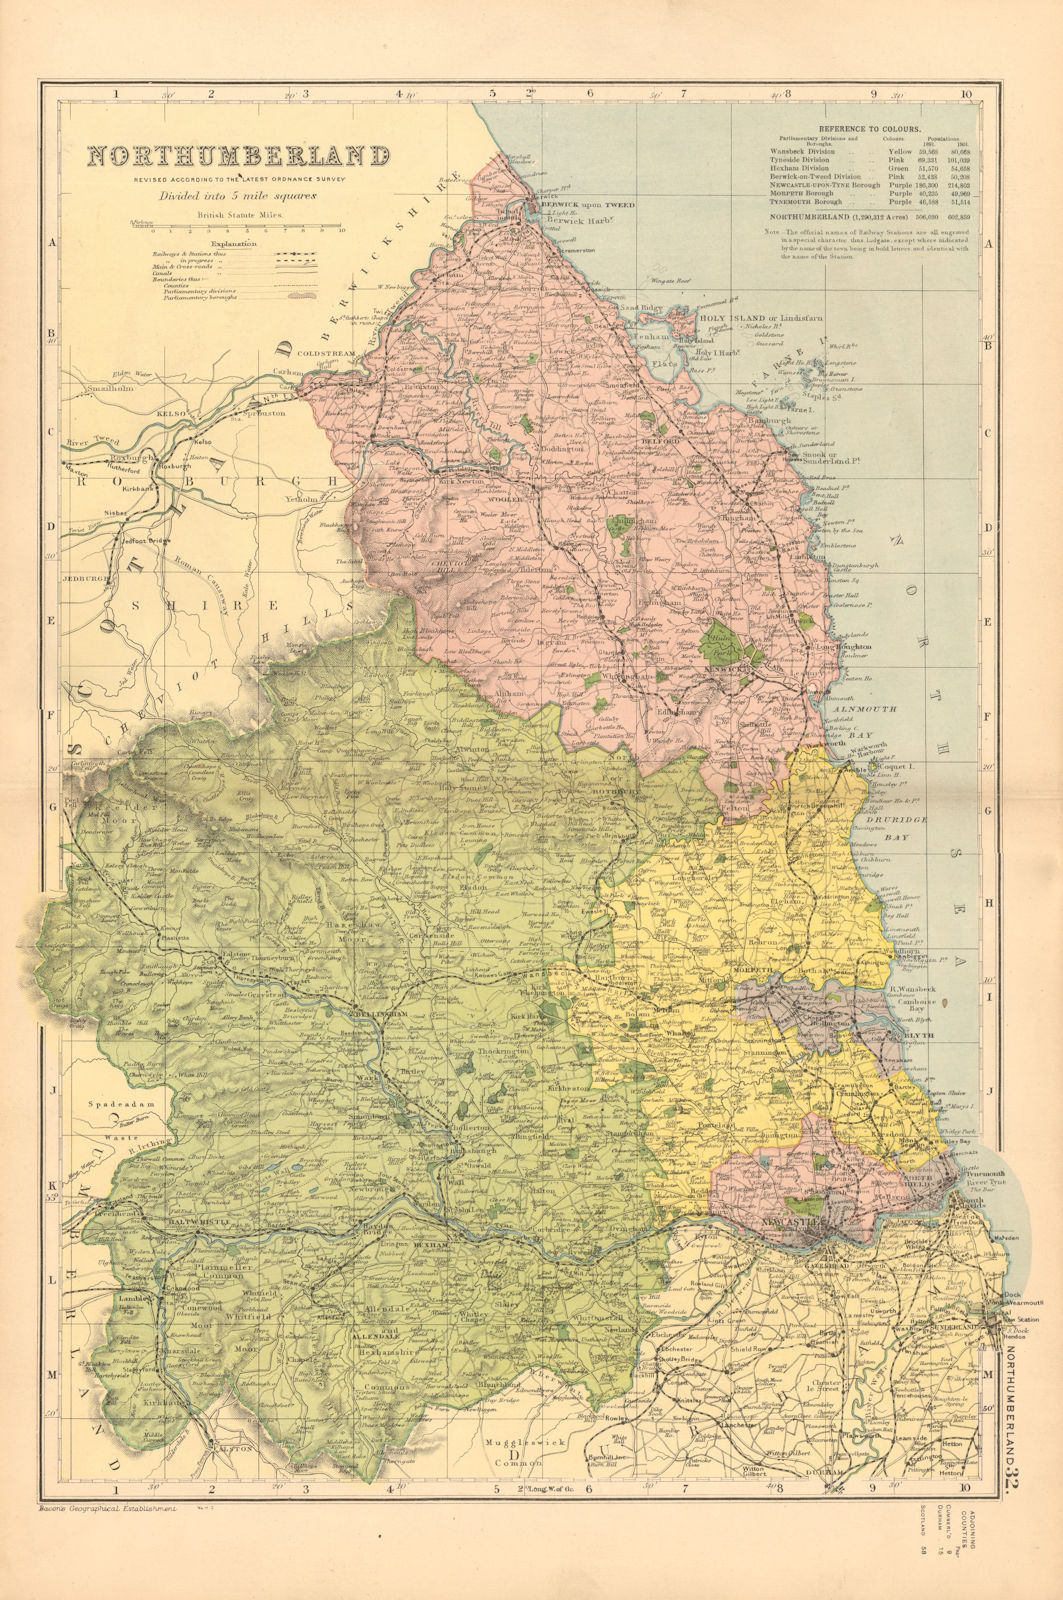 NORTHUMBERLAND. Showing Parliamentary divisions,boroughs & parks.BACON 1904 map